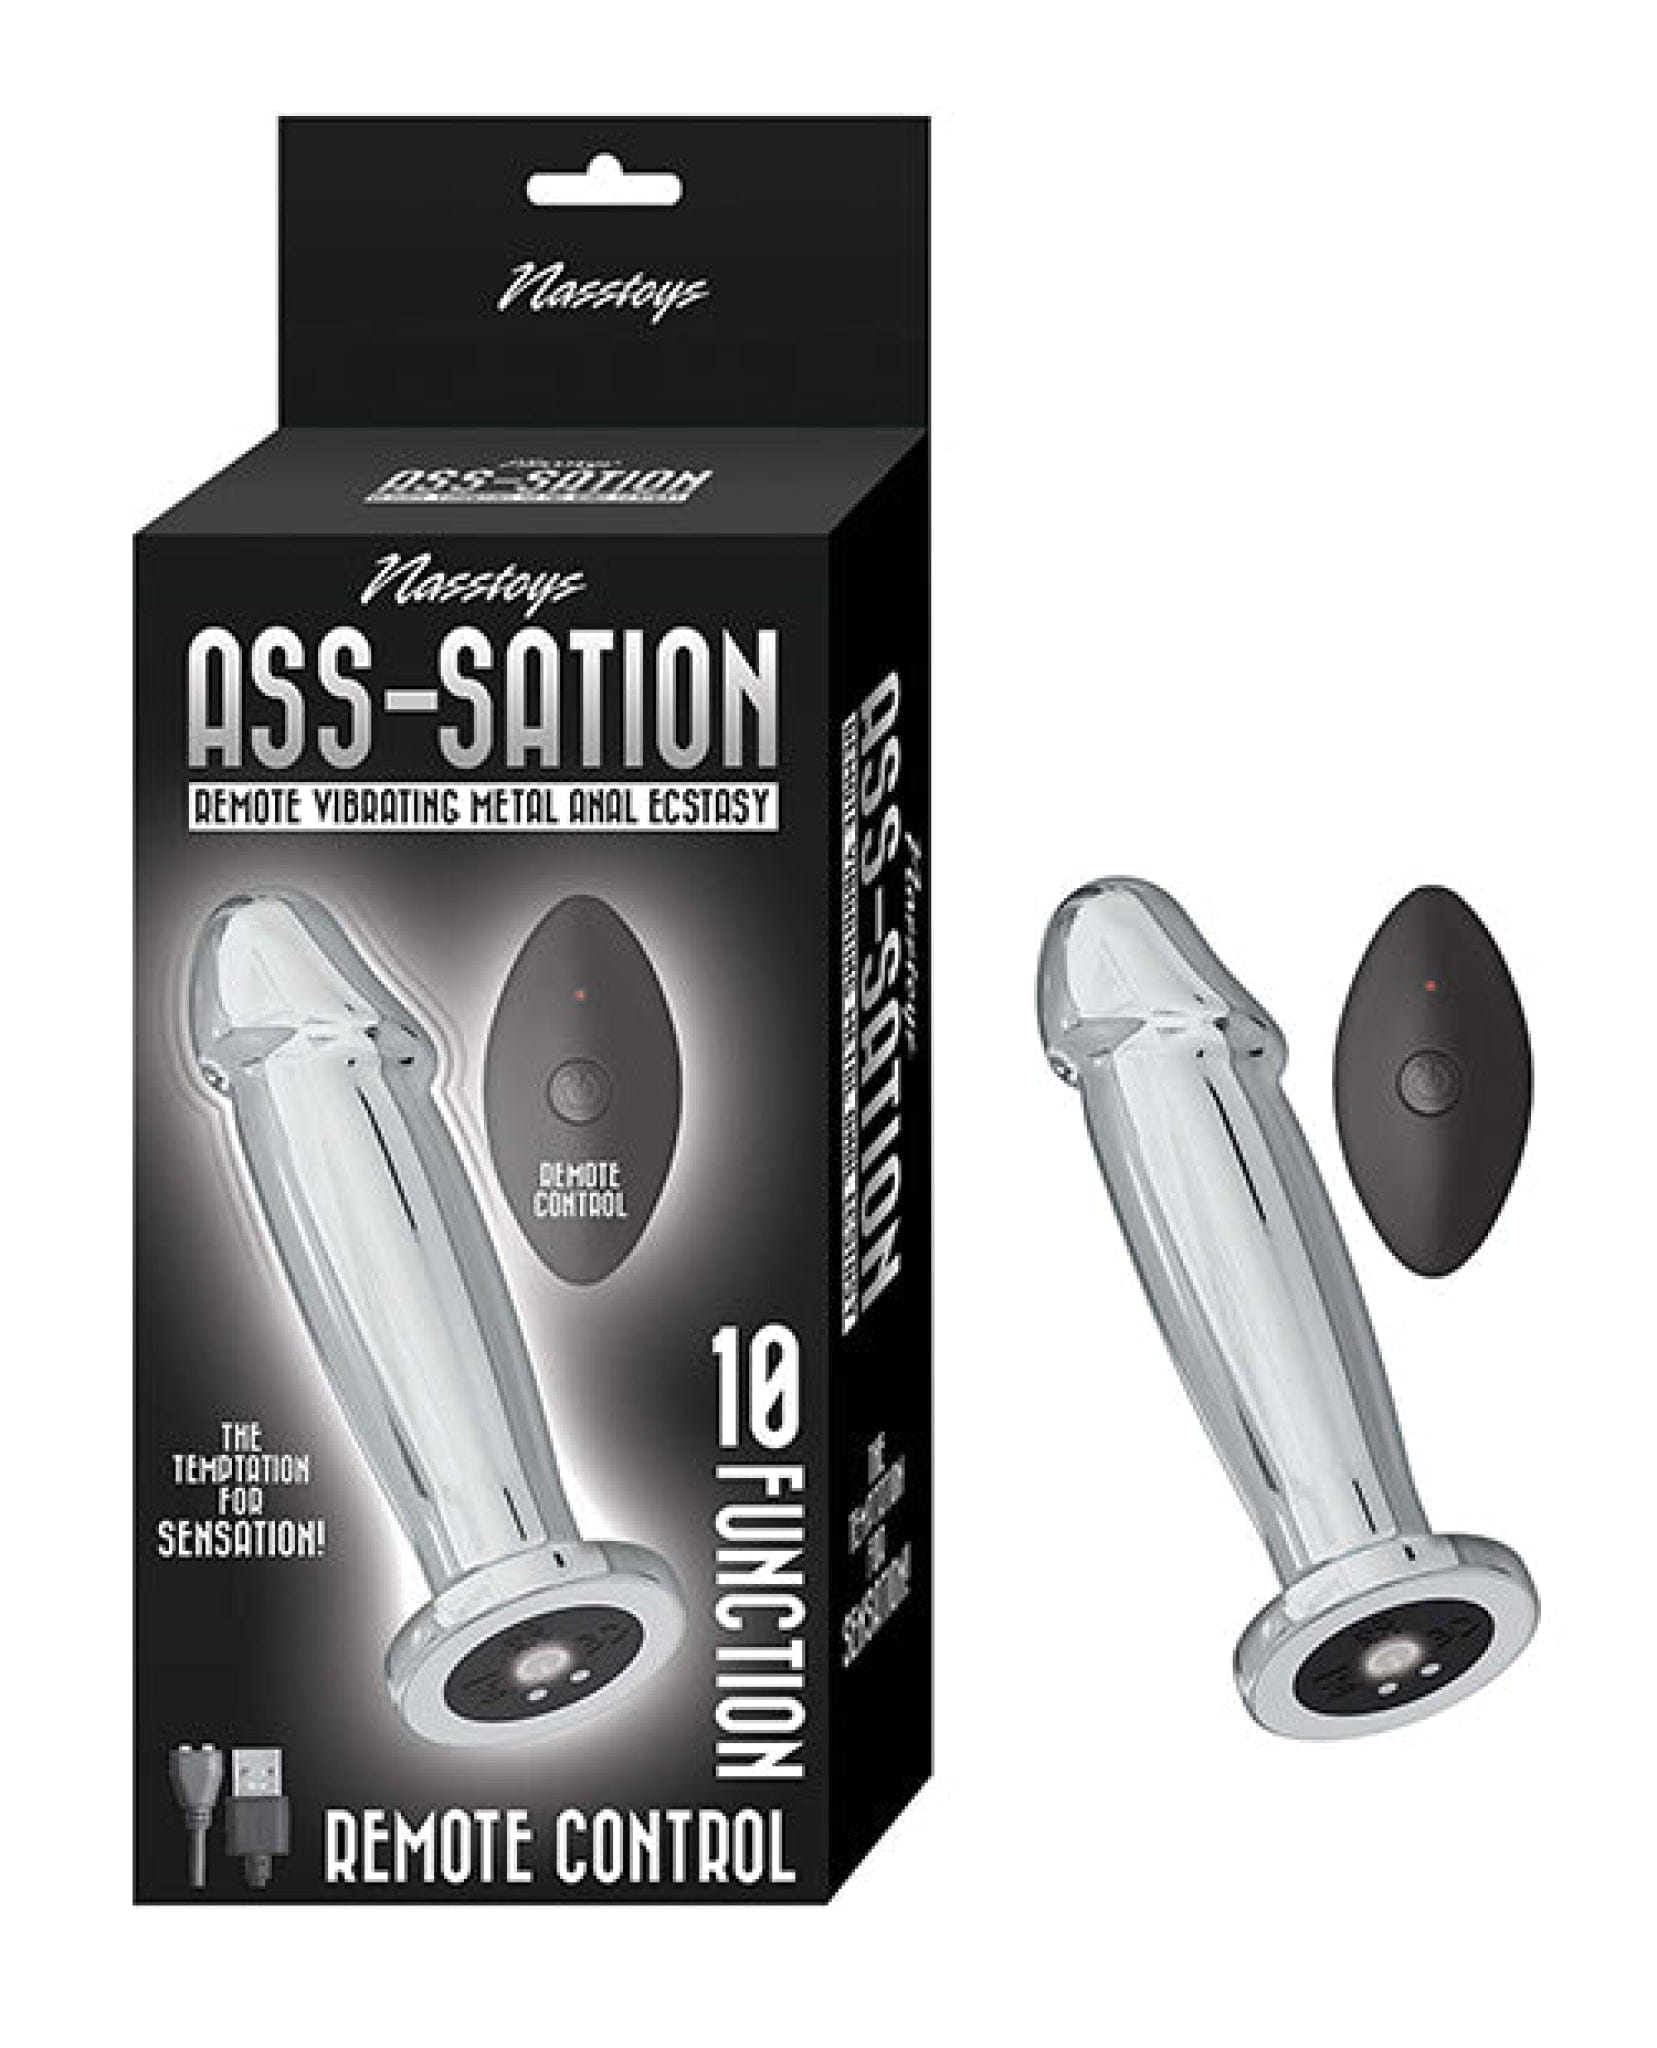 Doll Authority Anal Products Silver Ass-sation Remote Vibrating Metal Anal Ecstasy